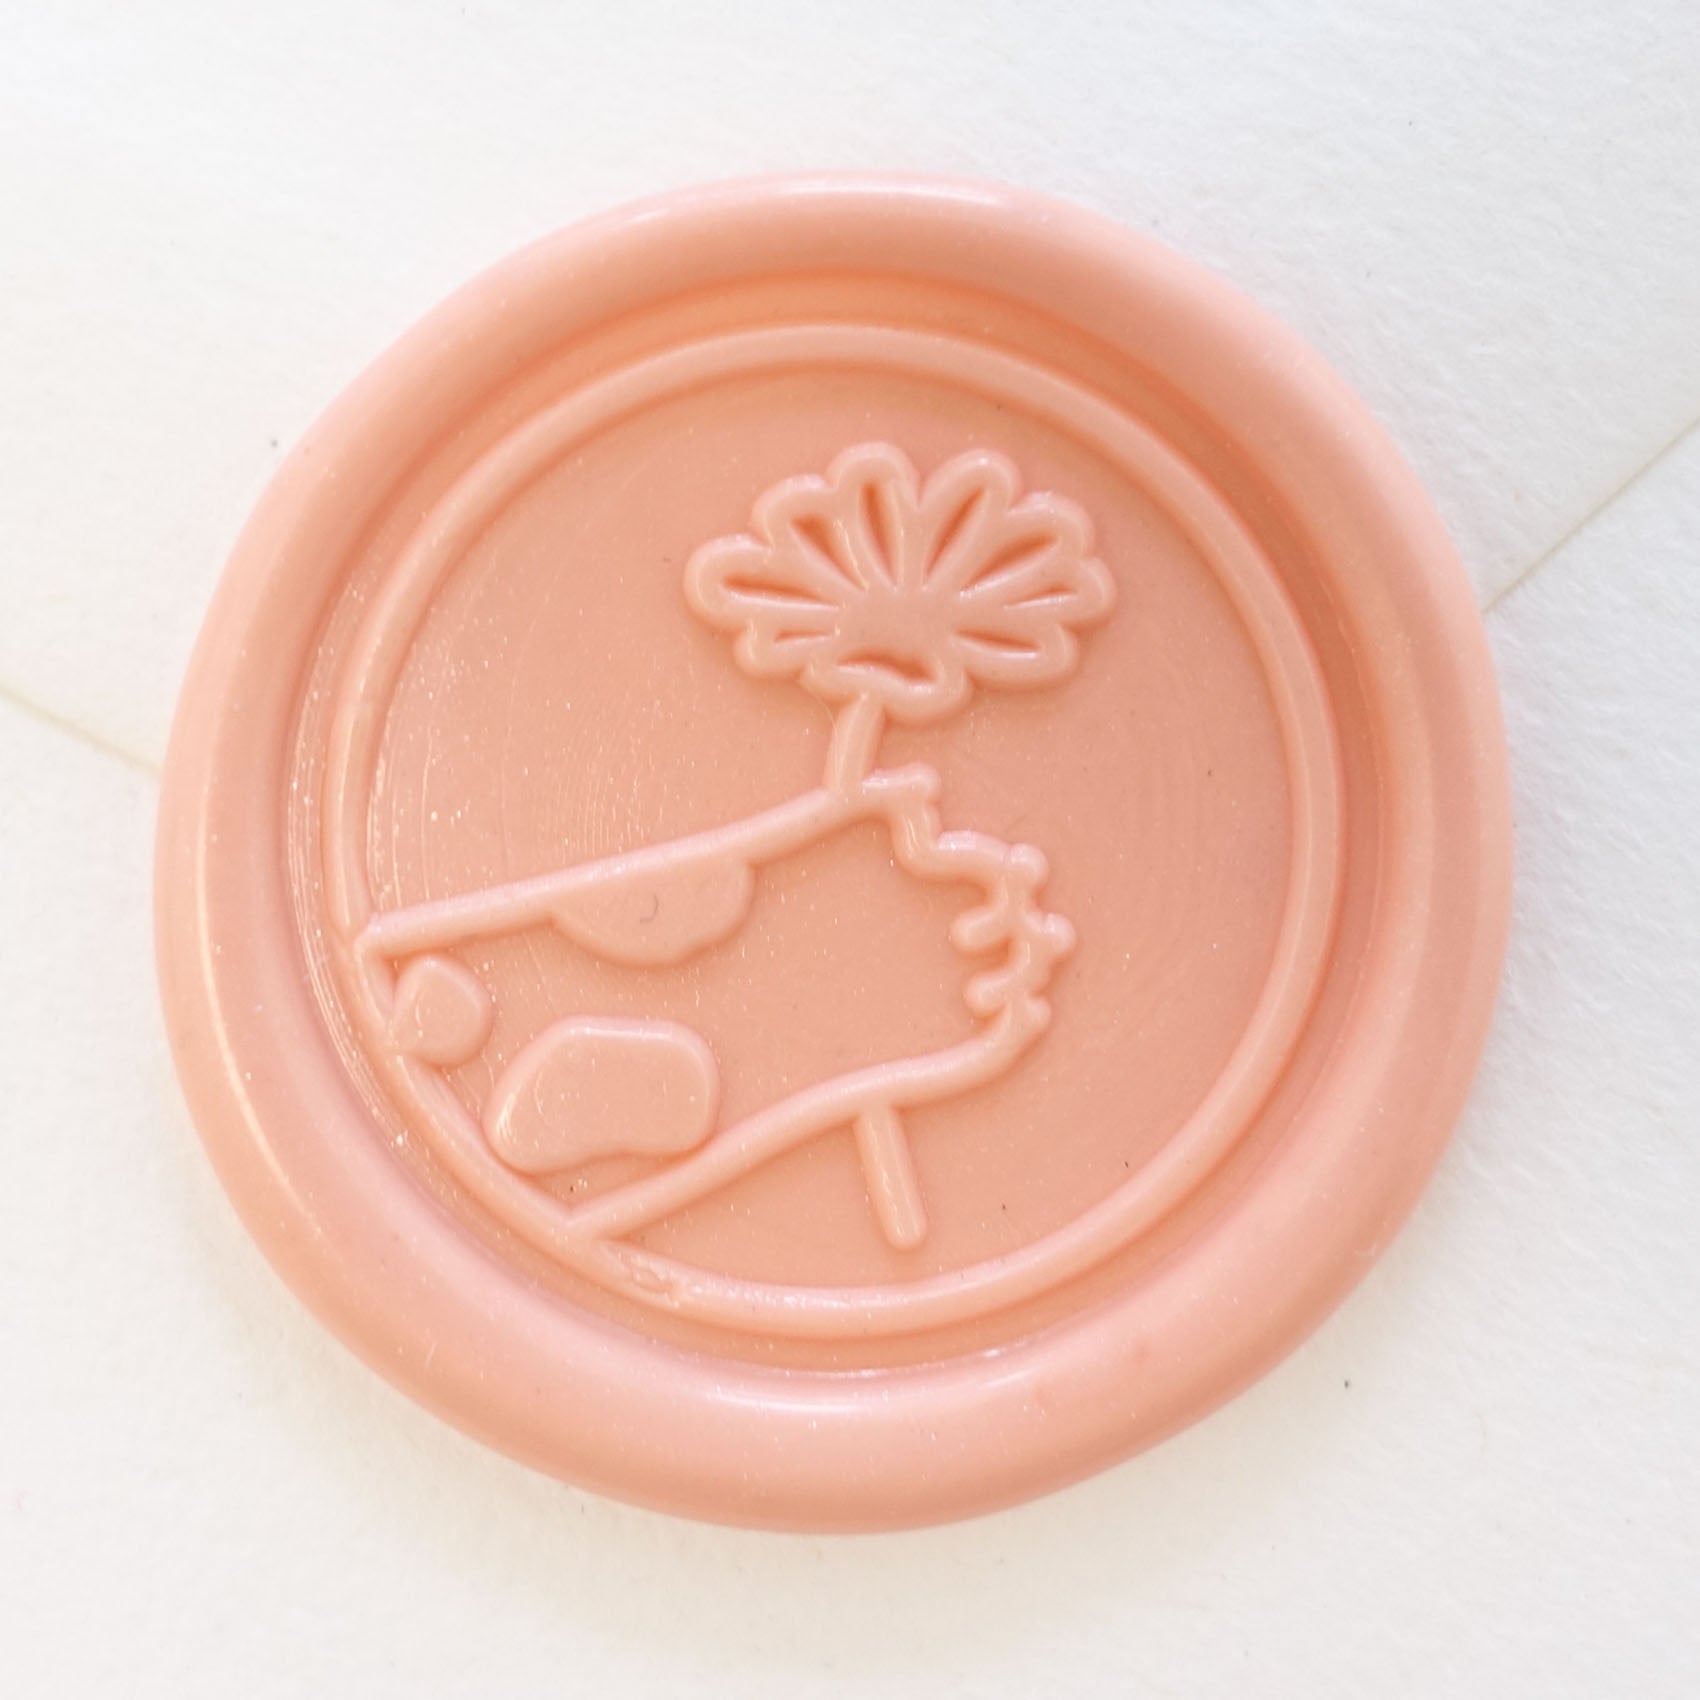 [PRE-ORDER] Paw Holding Flower wax seal stamp, wax seal kit or stamp head